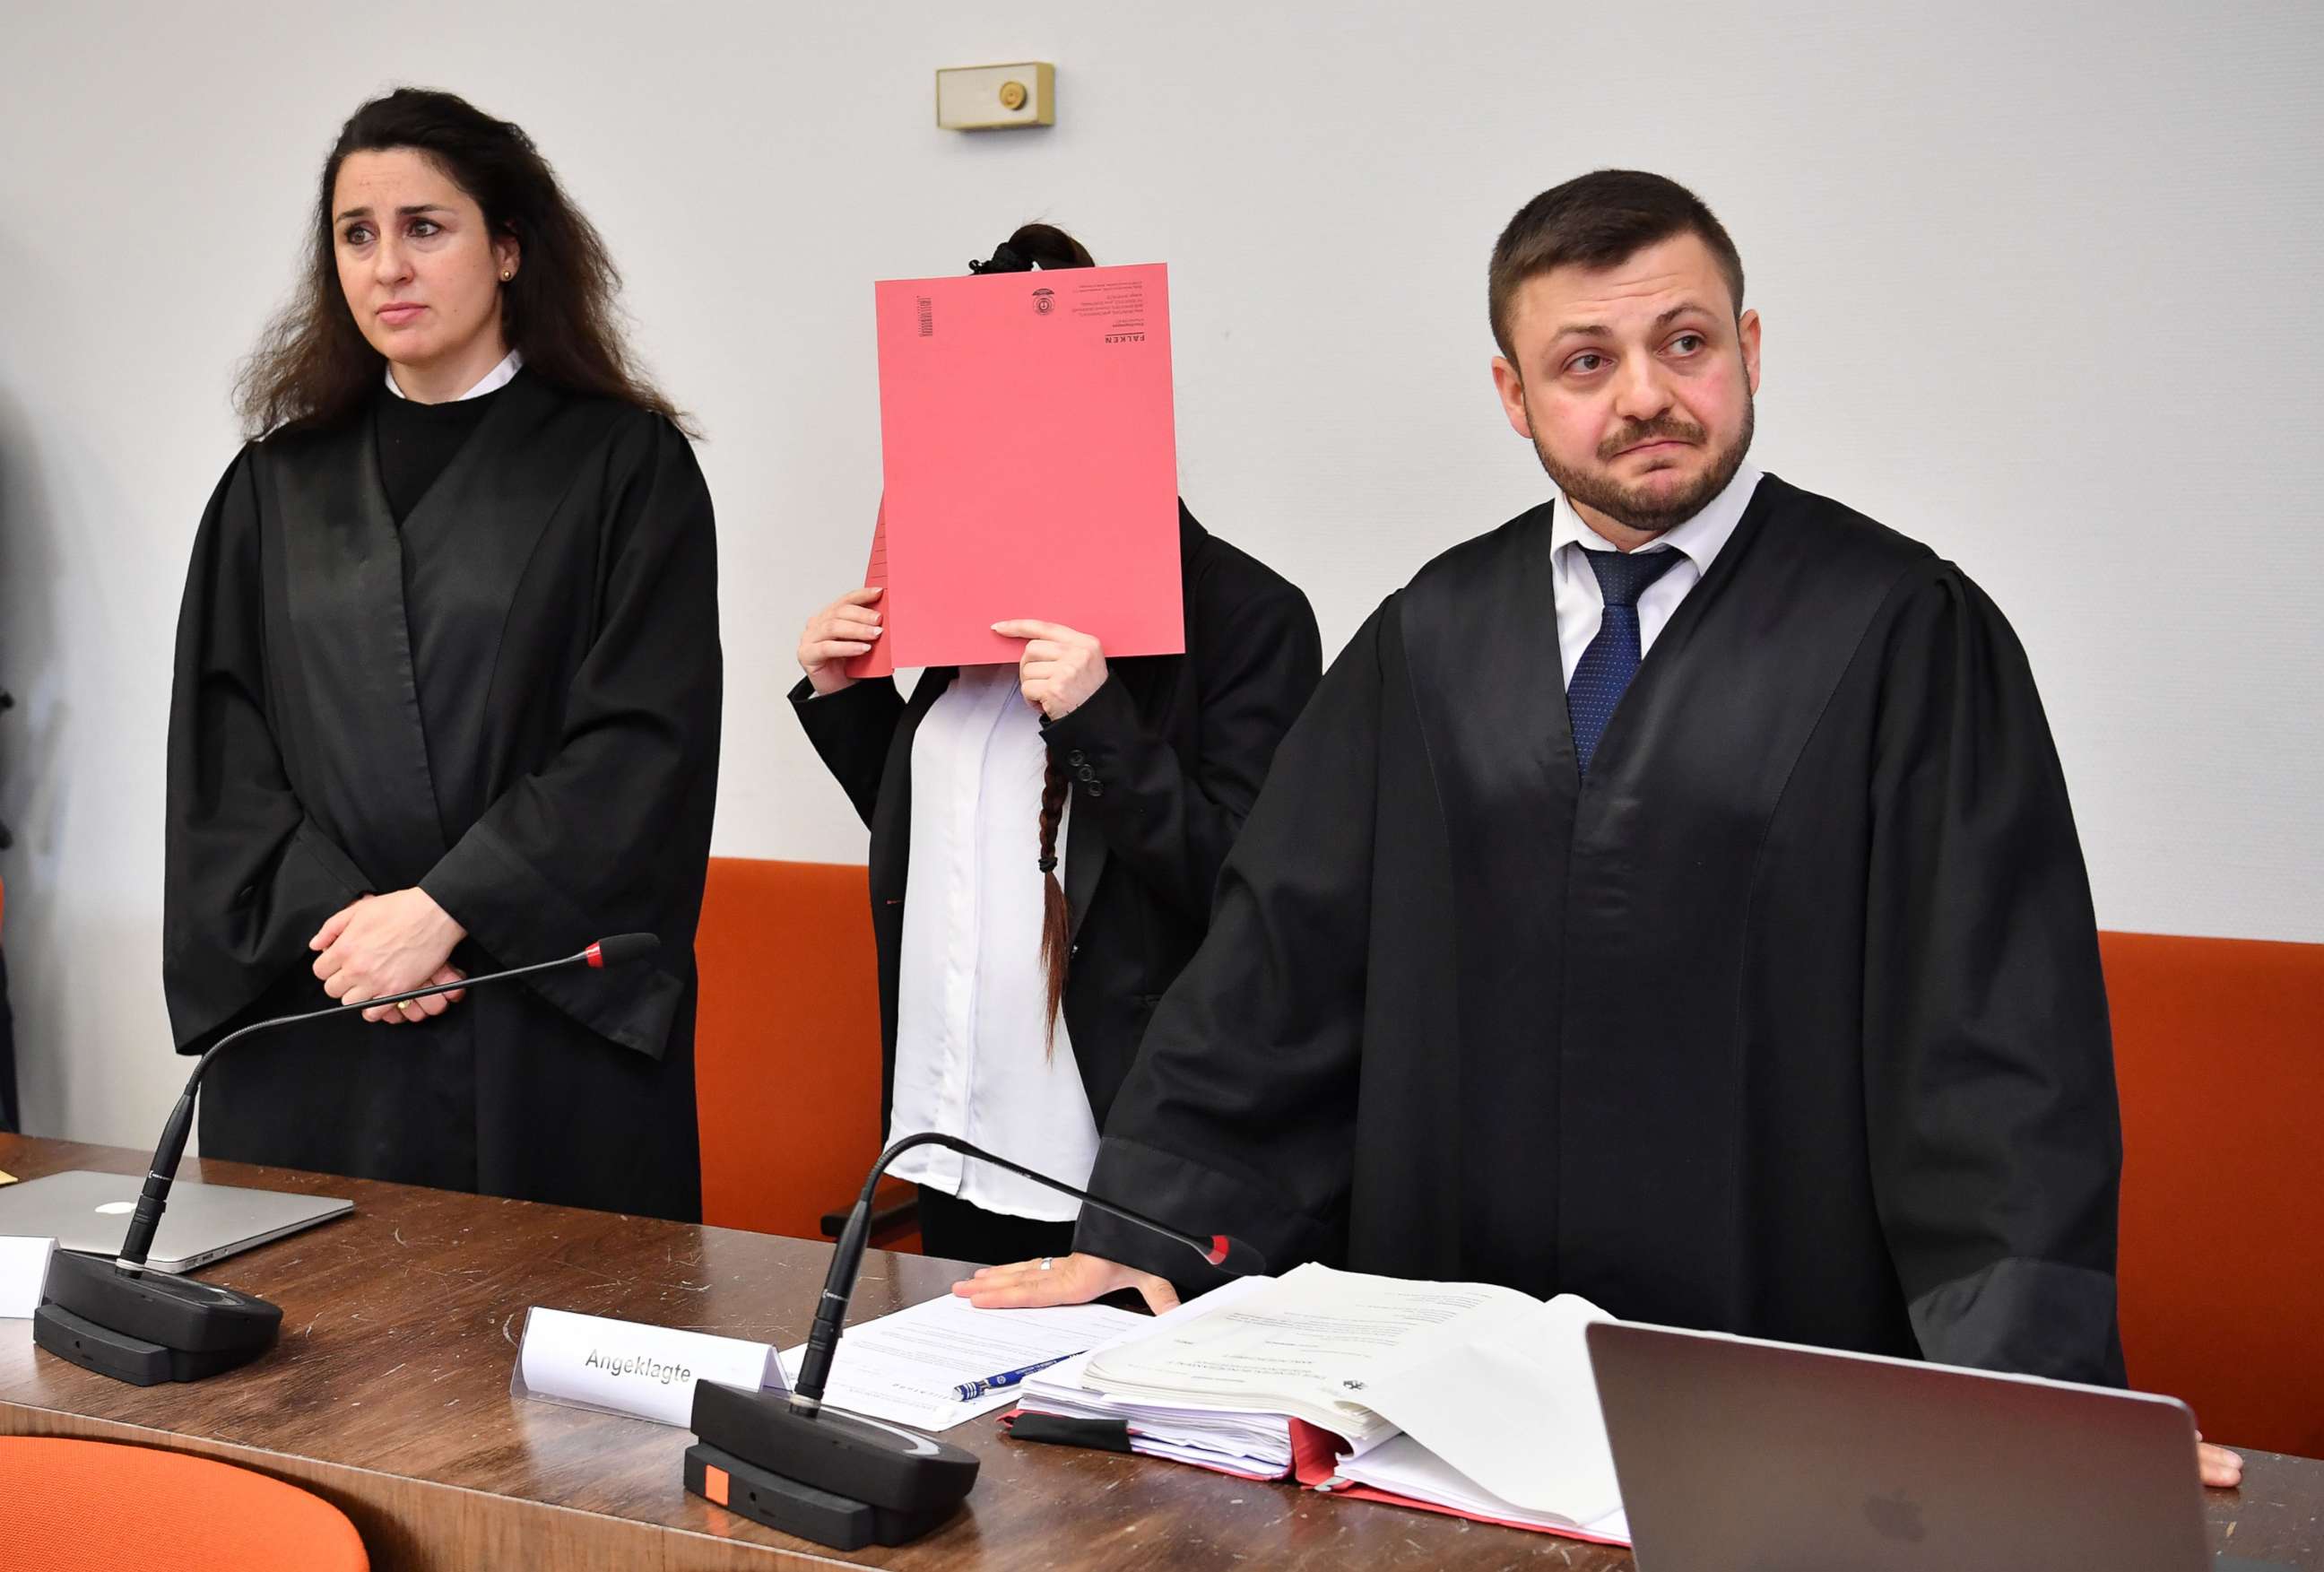 PHOTO:Jennifer W. stands in between her lawyers Ali Aydin and Seda Basay-Yildiz at the first day of her trial at the Oberlandesgericht courthouse, April 9, 2019, in Munich.